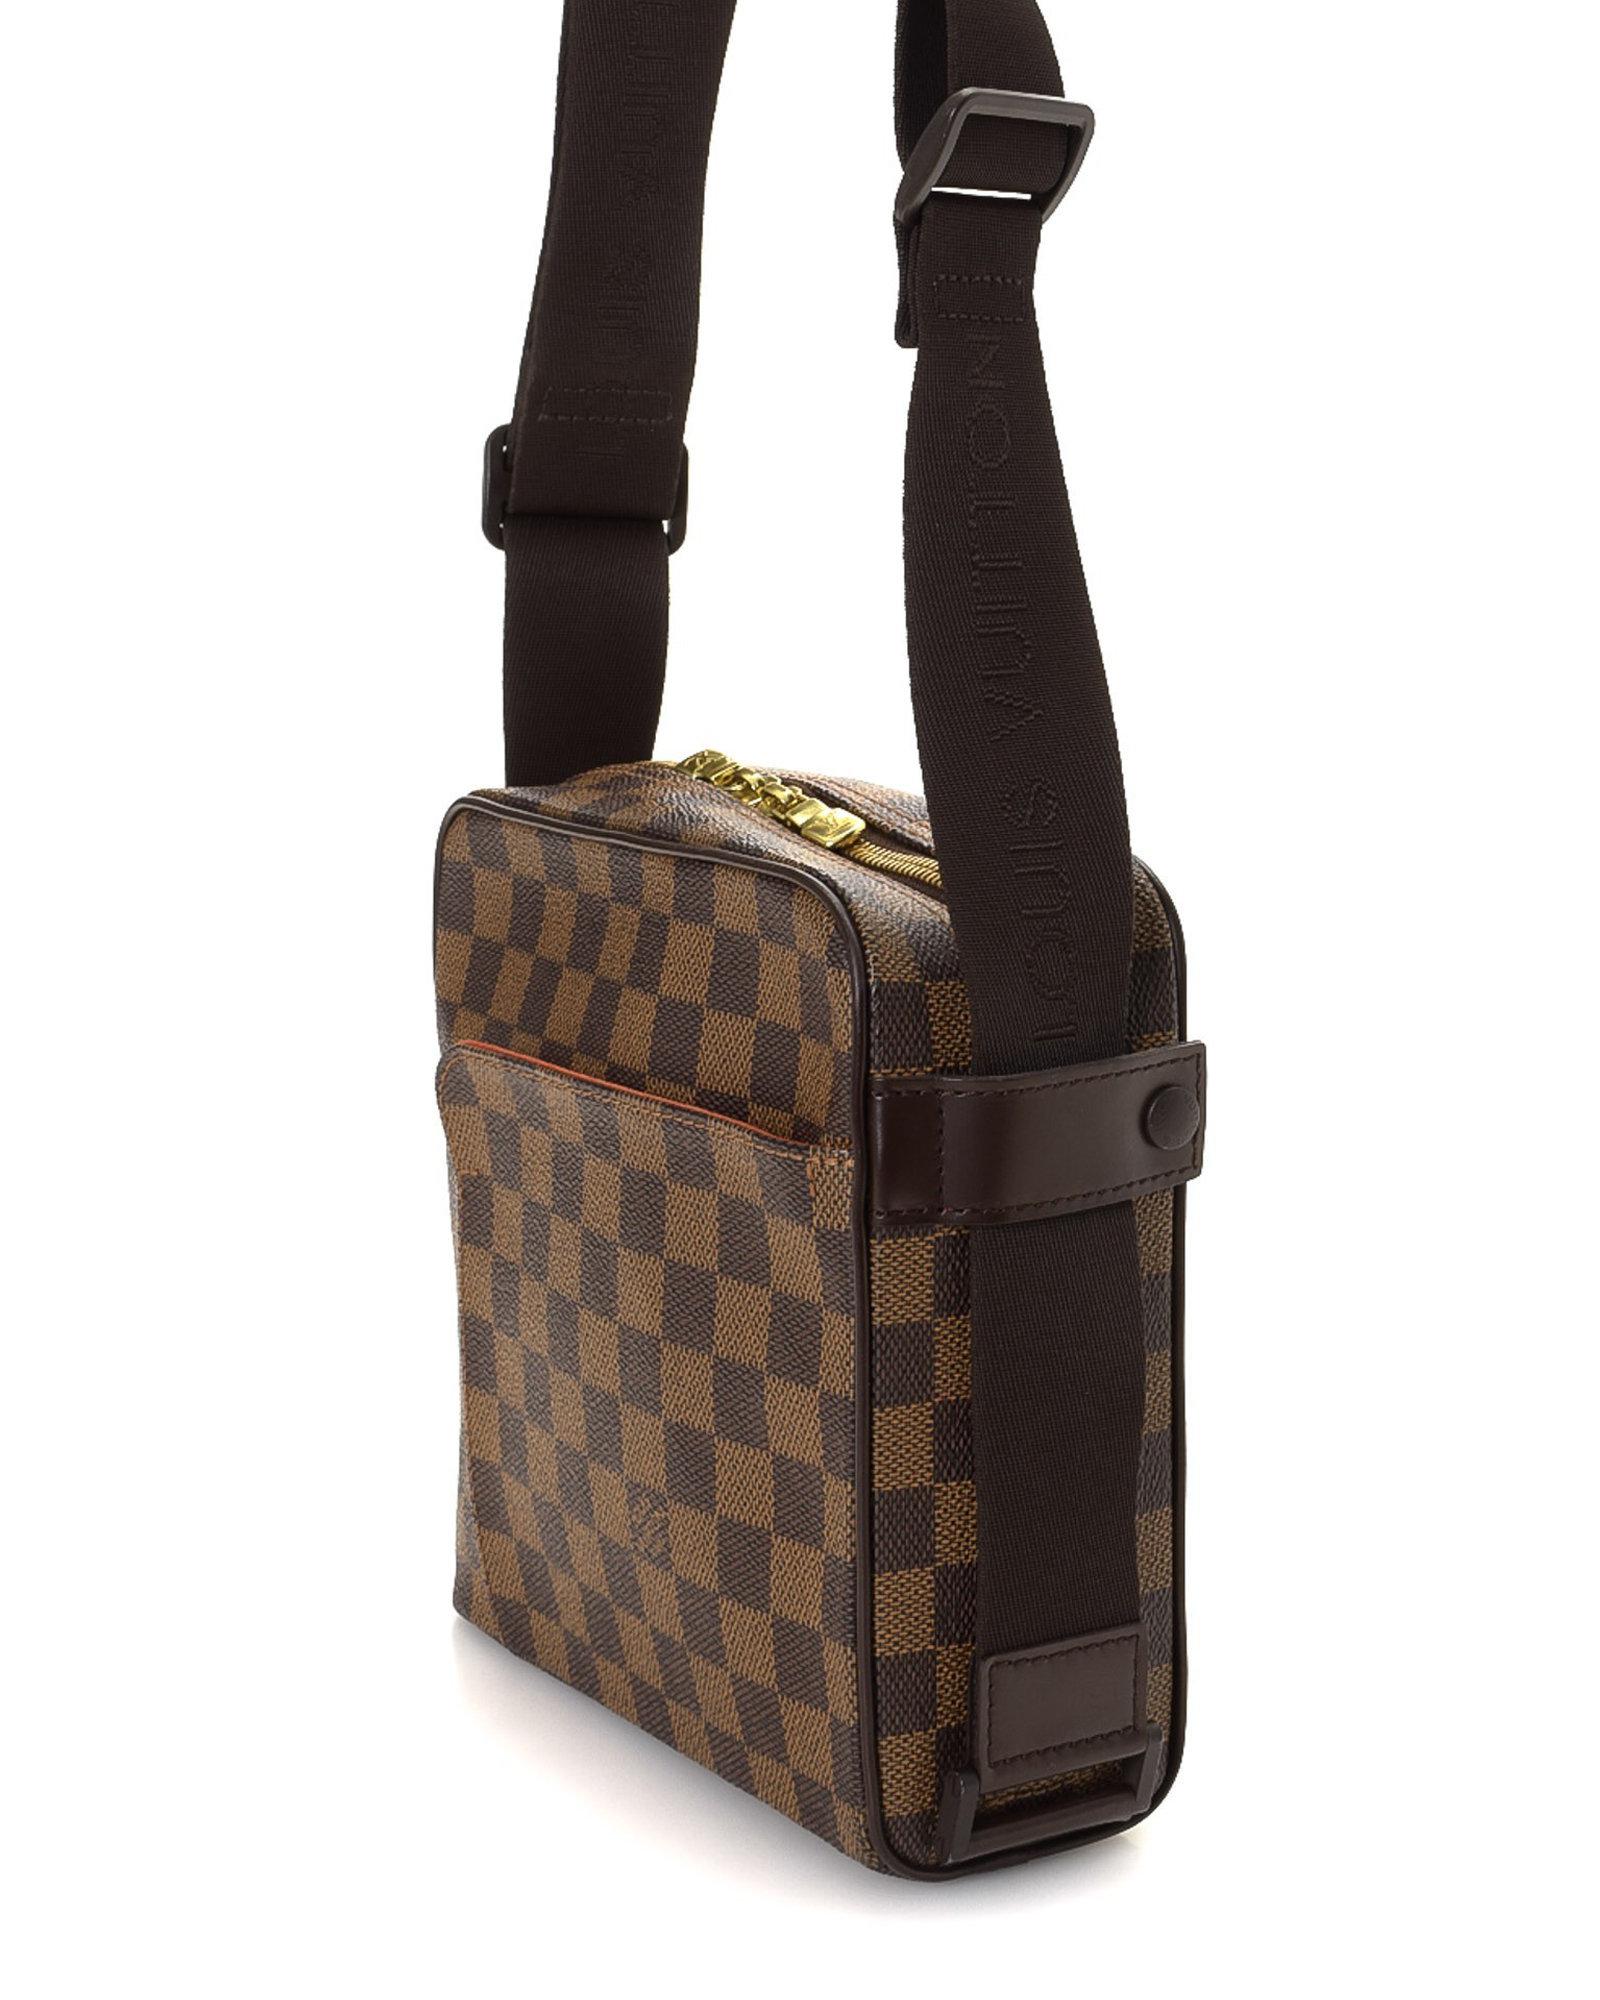 Why the LV Men’s Crossbody Bag is your new go-to accessory